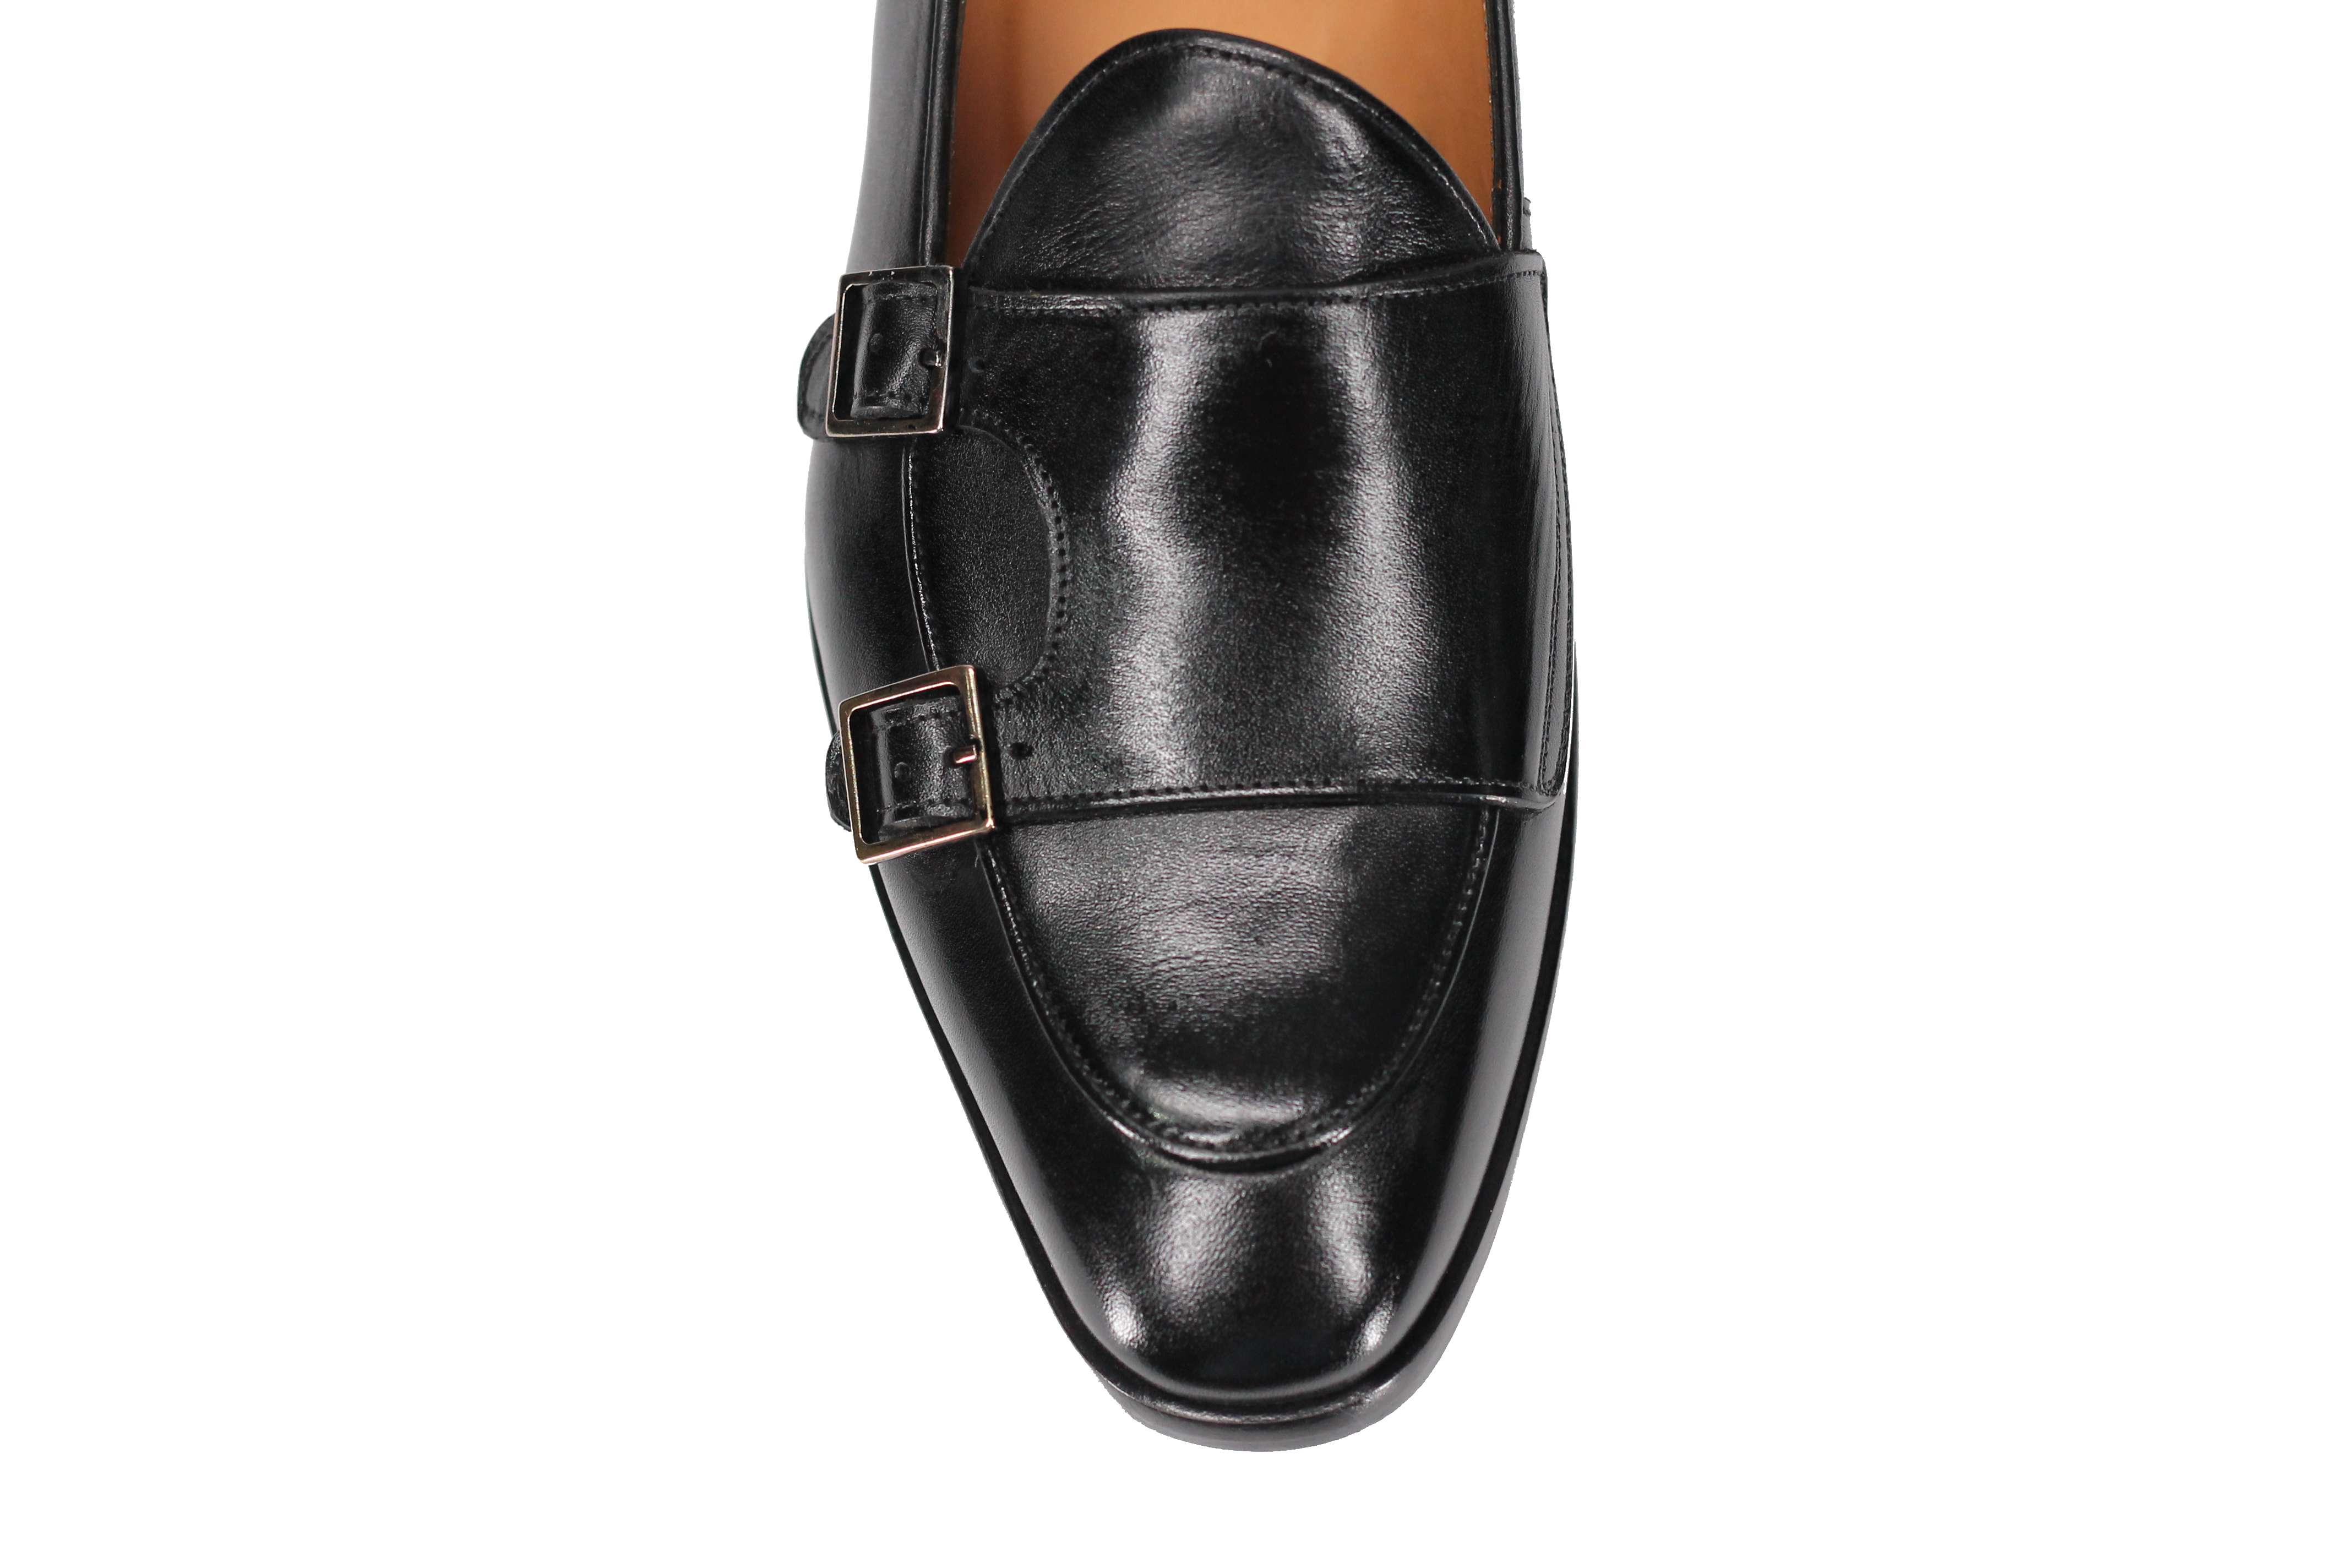 Black Real Leather Double Monk Shoes